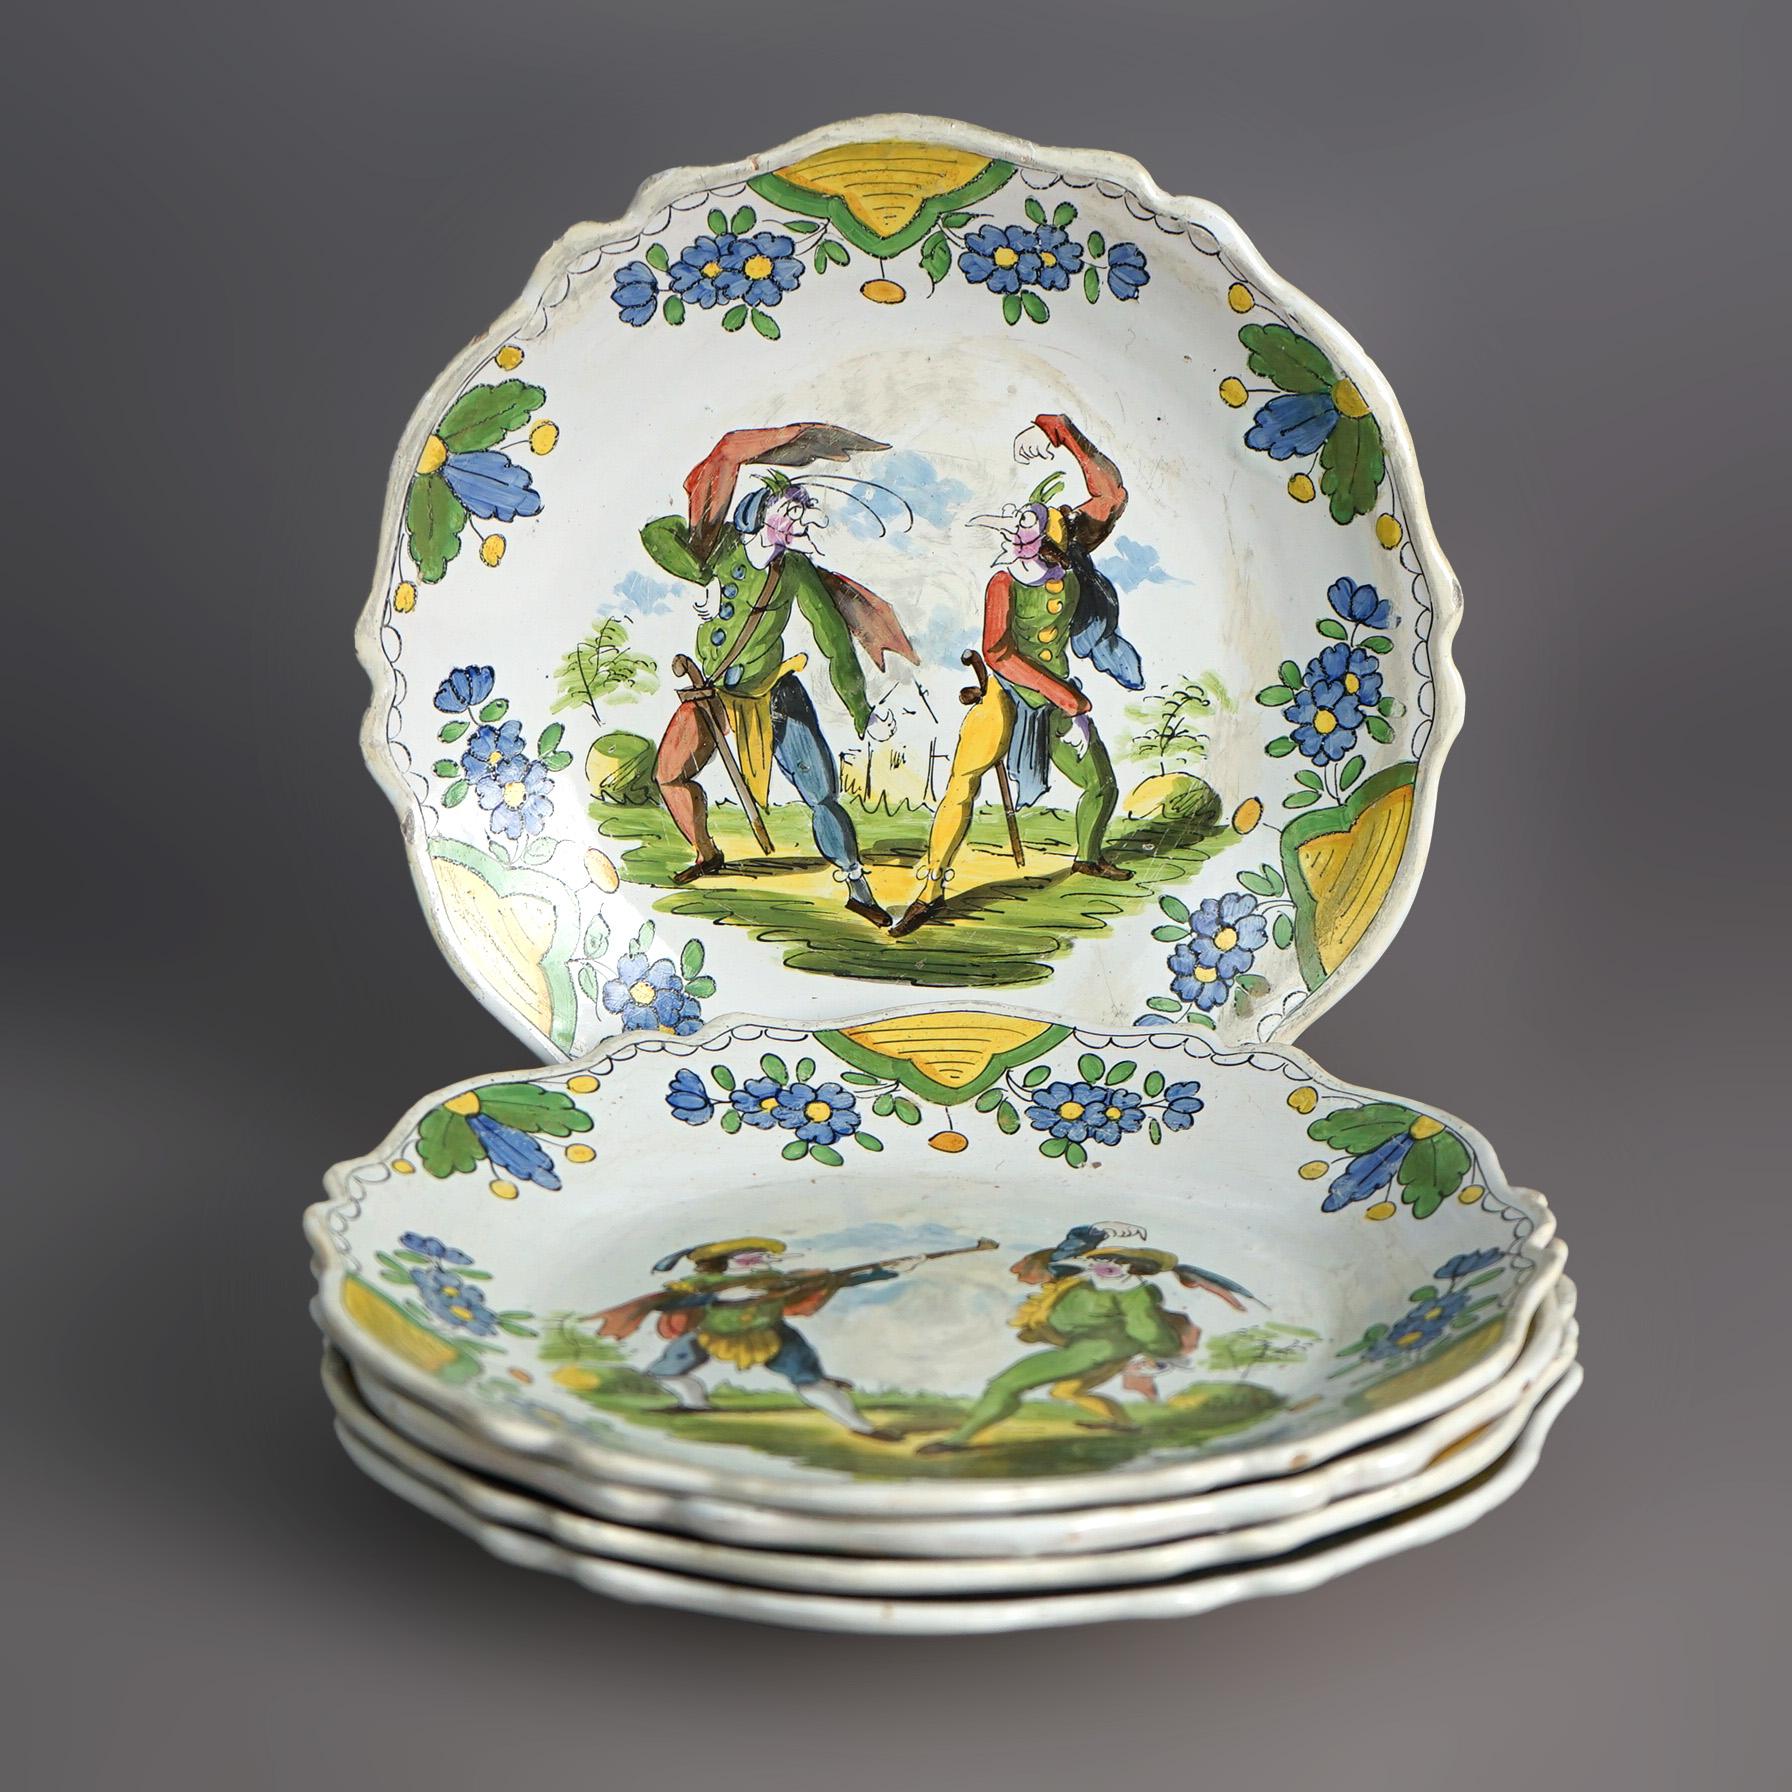 Five Antique French Faience Pottery Hand Painted Plates by Les Islettes 18thC  For Sale 1